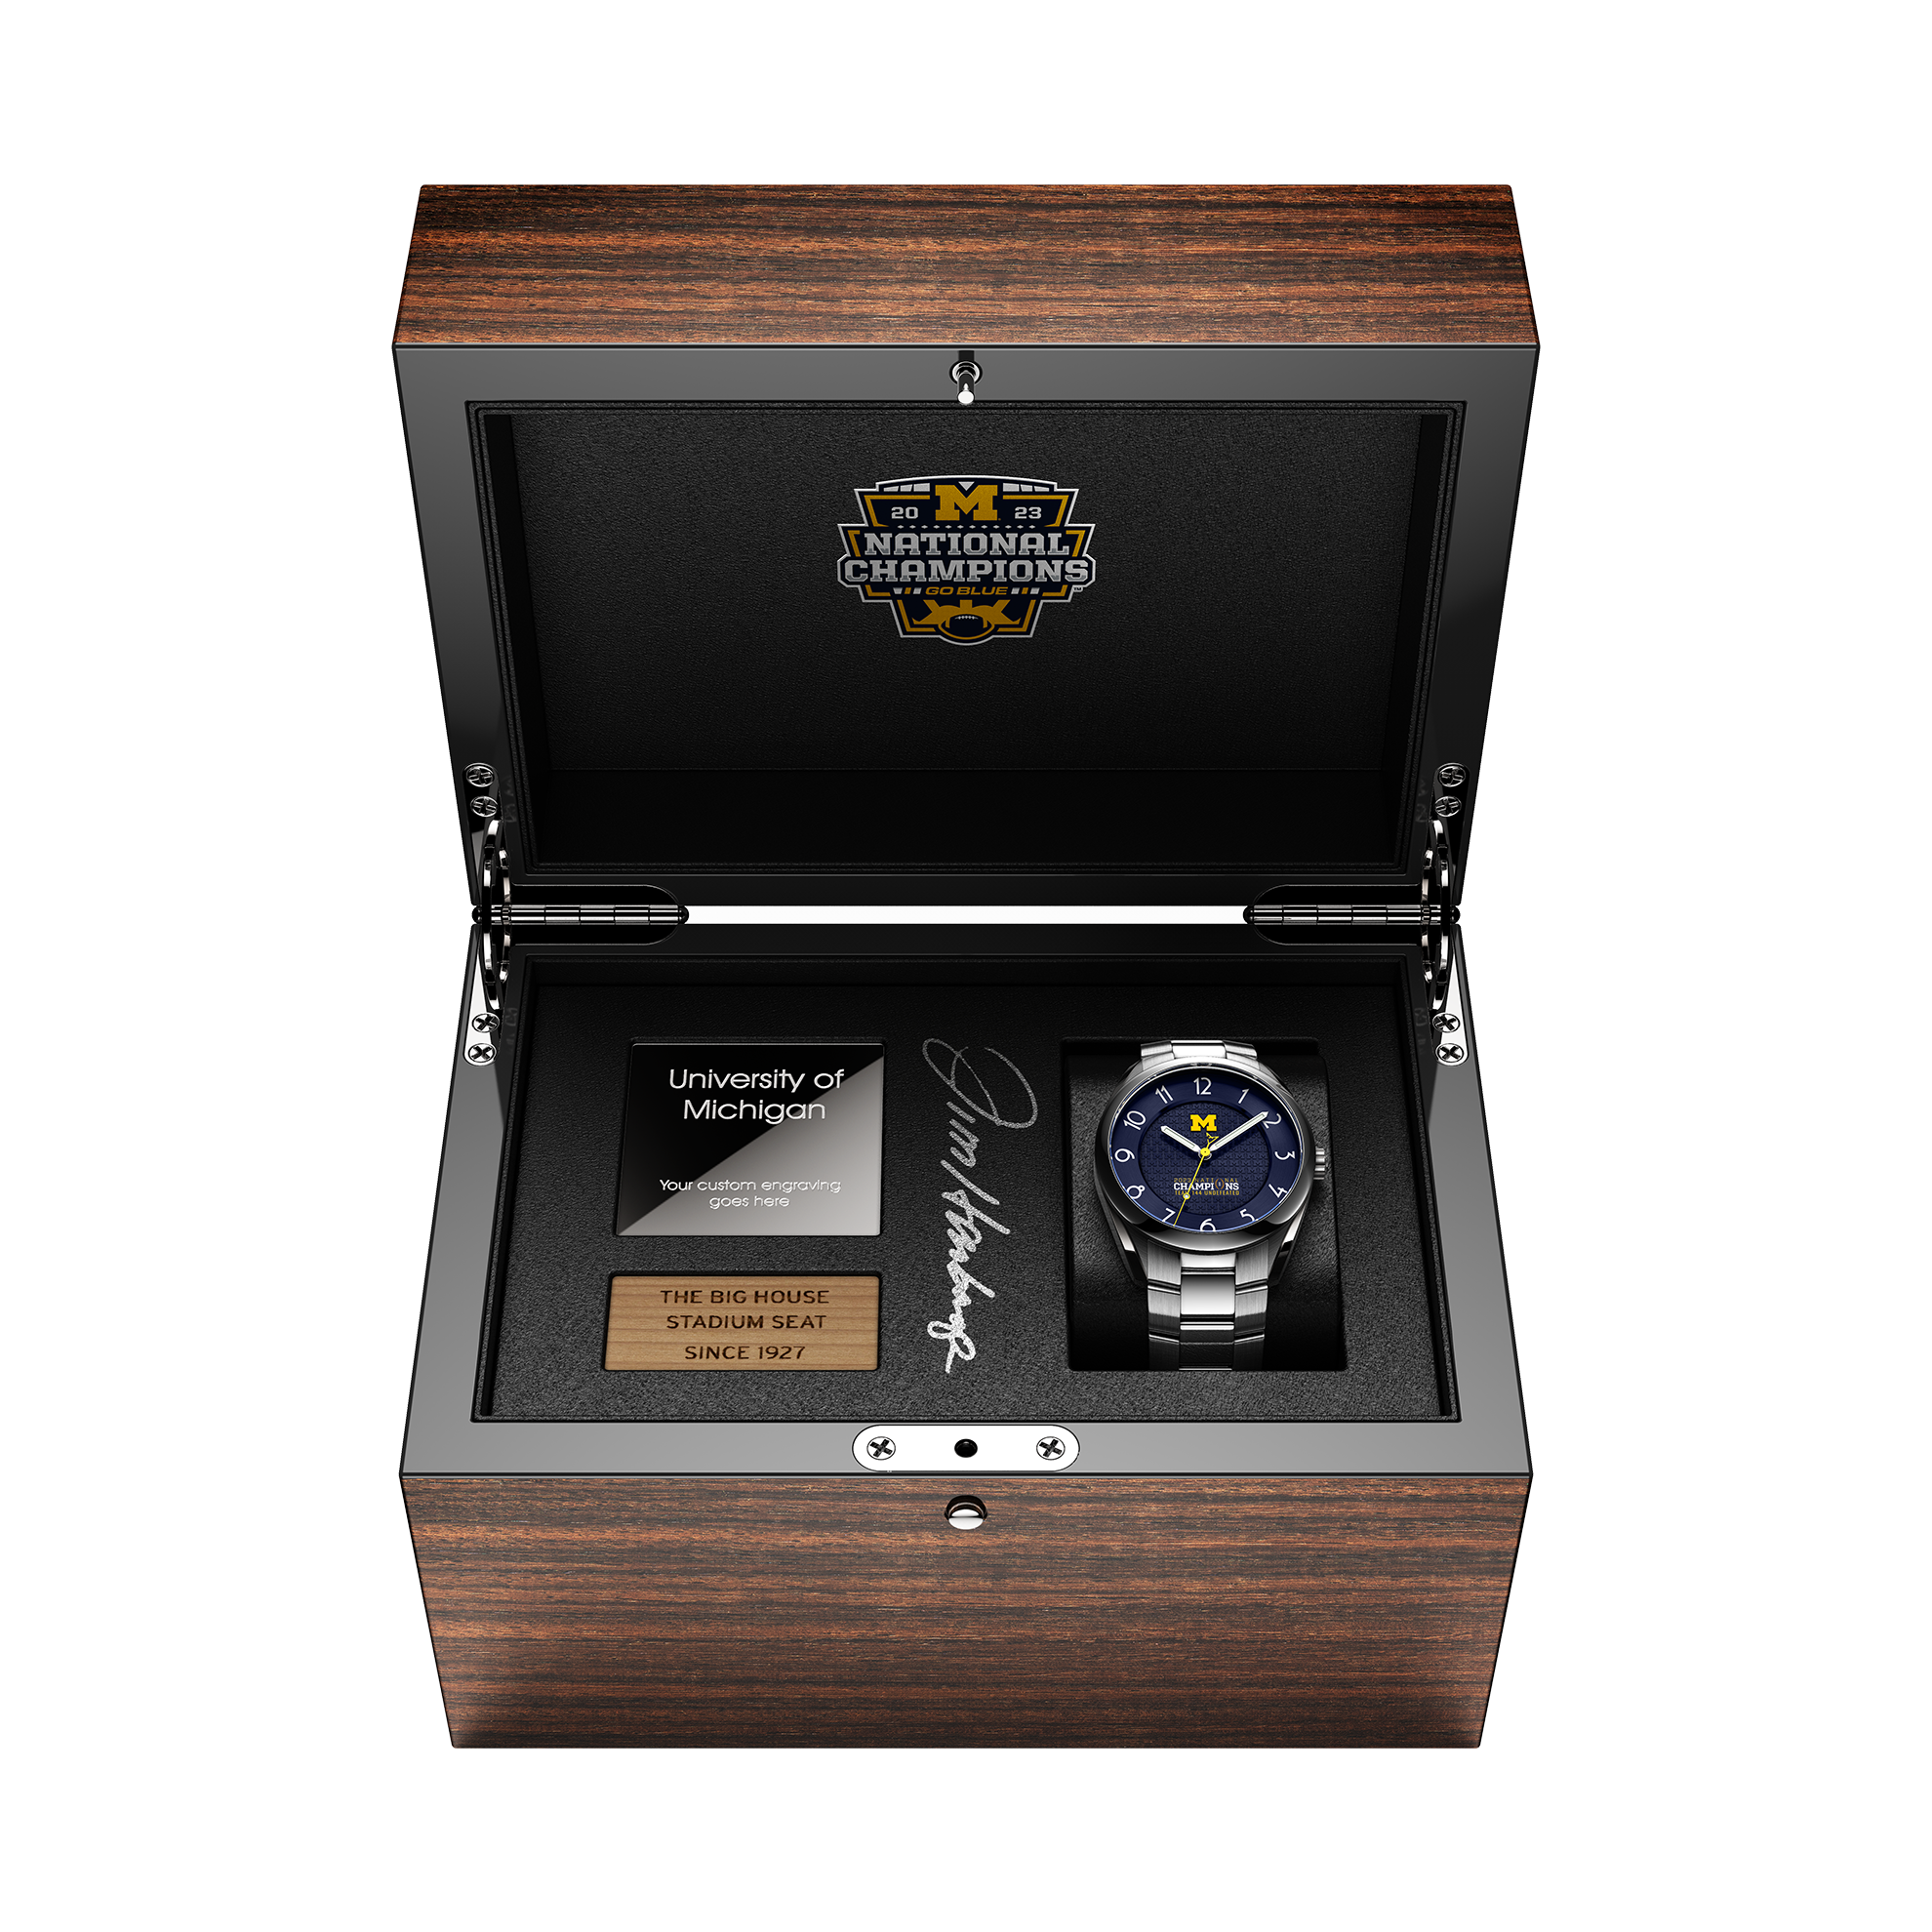 2023 Michigan National Champions Jim Harbaugh autographed display box with the Kairos II Swiss made automatic watch in stainless steel  and a piece of wood from The Big House stadium seats originally installed in 1927.